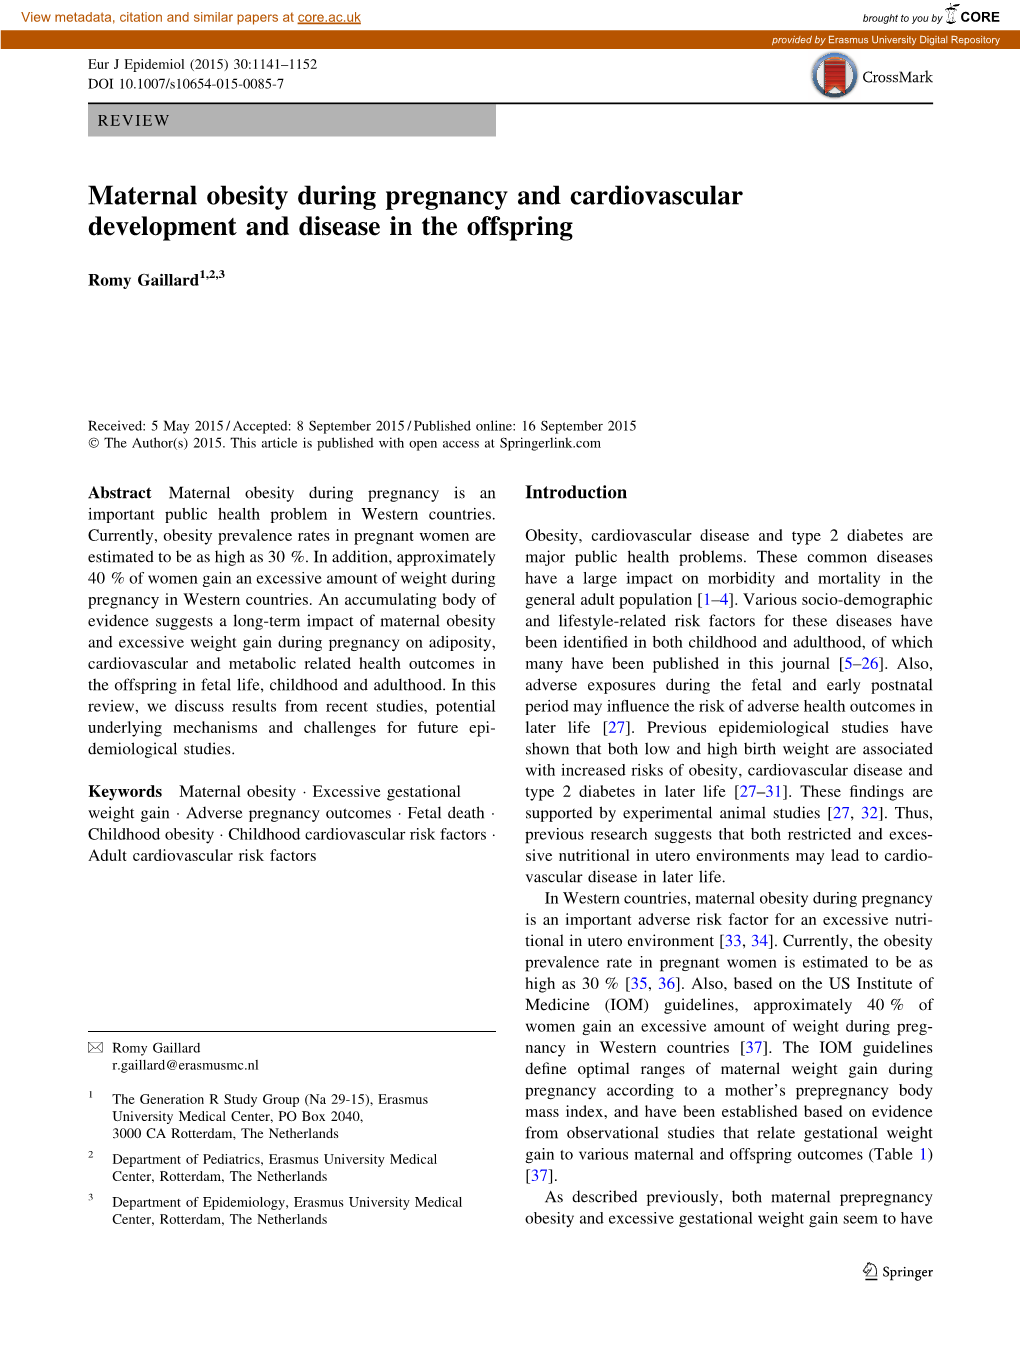 Maternal Obesity During Pregnancy and Cardiovascular Development and Disease in the Offspring